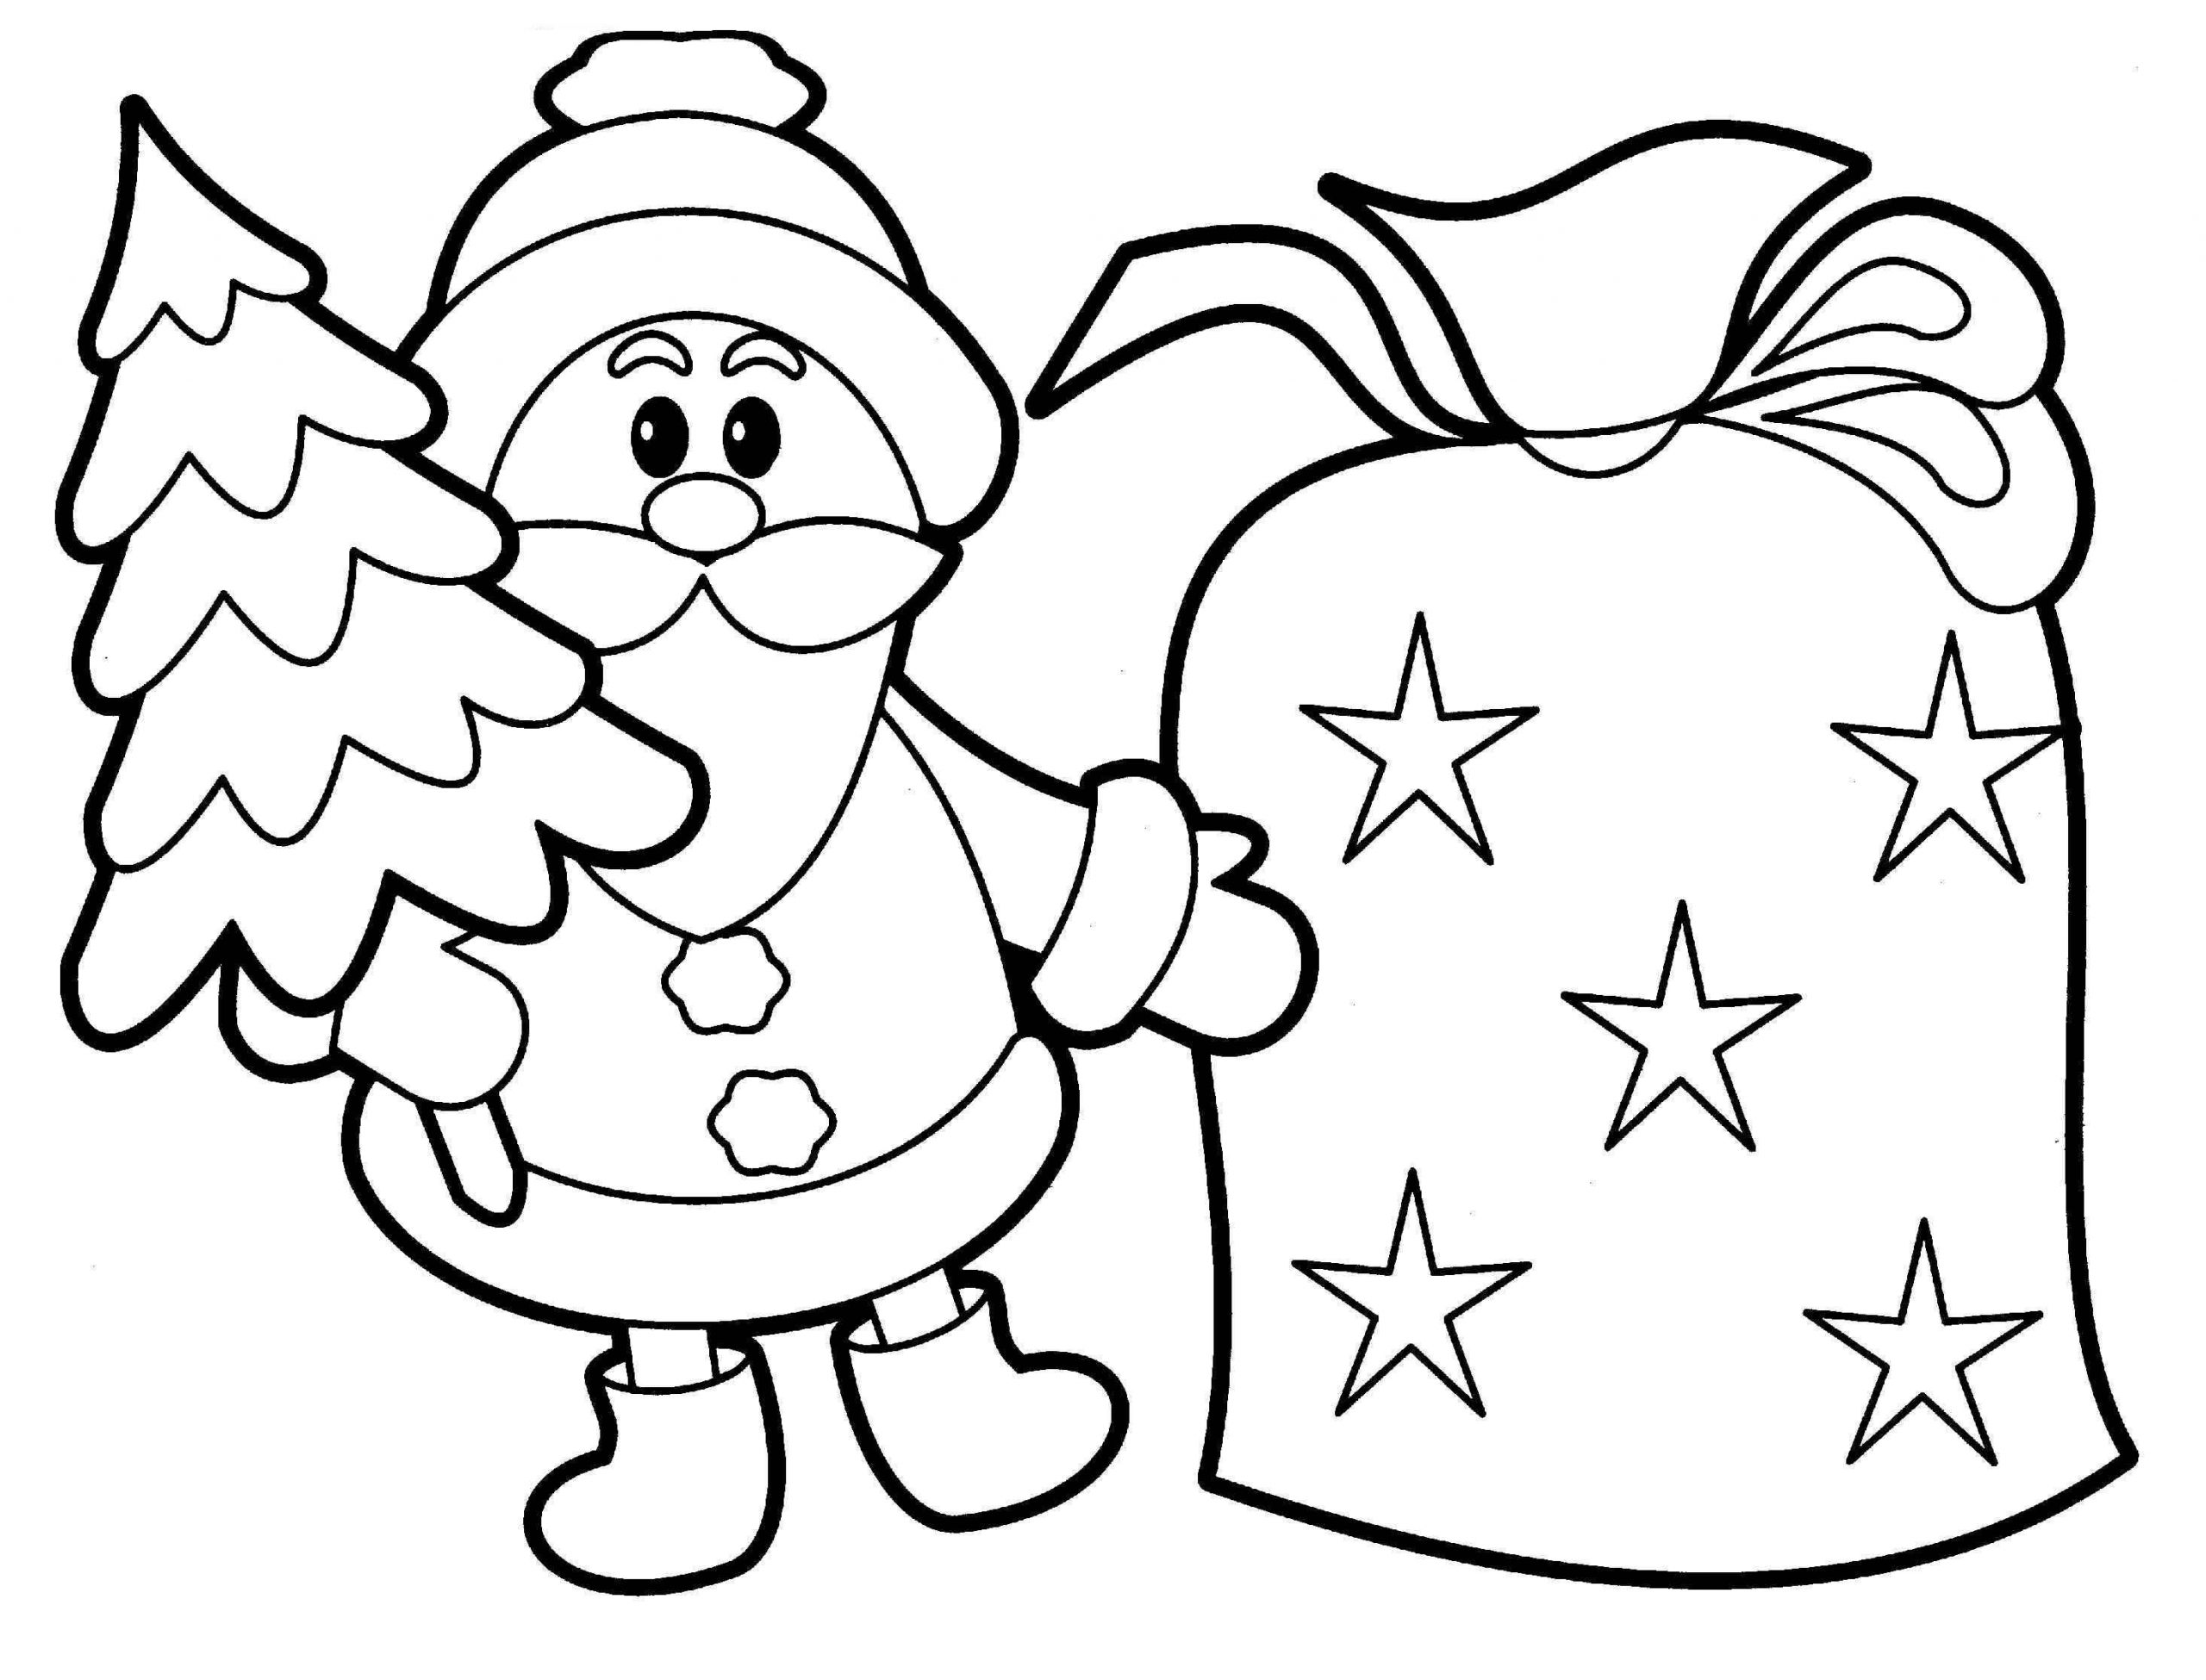 Toddler Christmas Coloring Pages Free
 Easy Preschool Coloring Pages